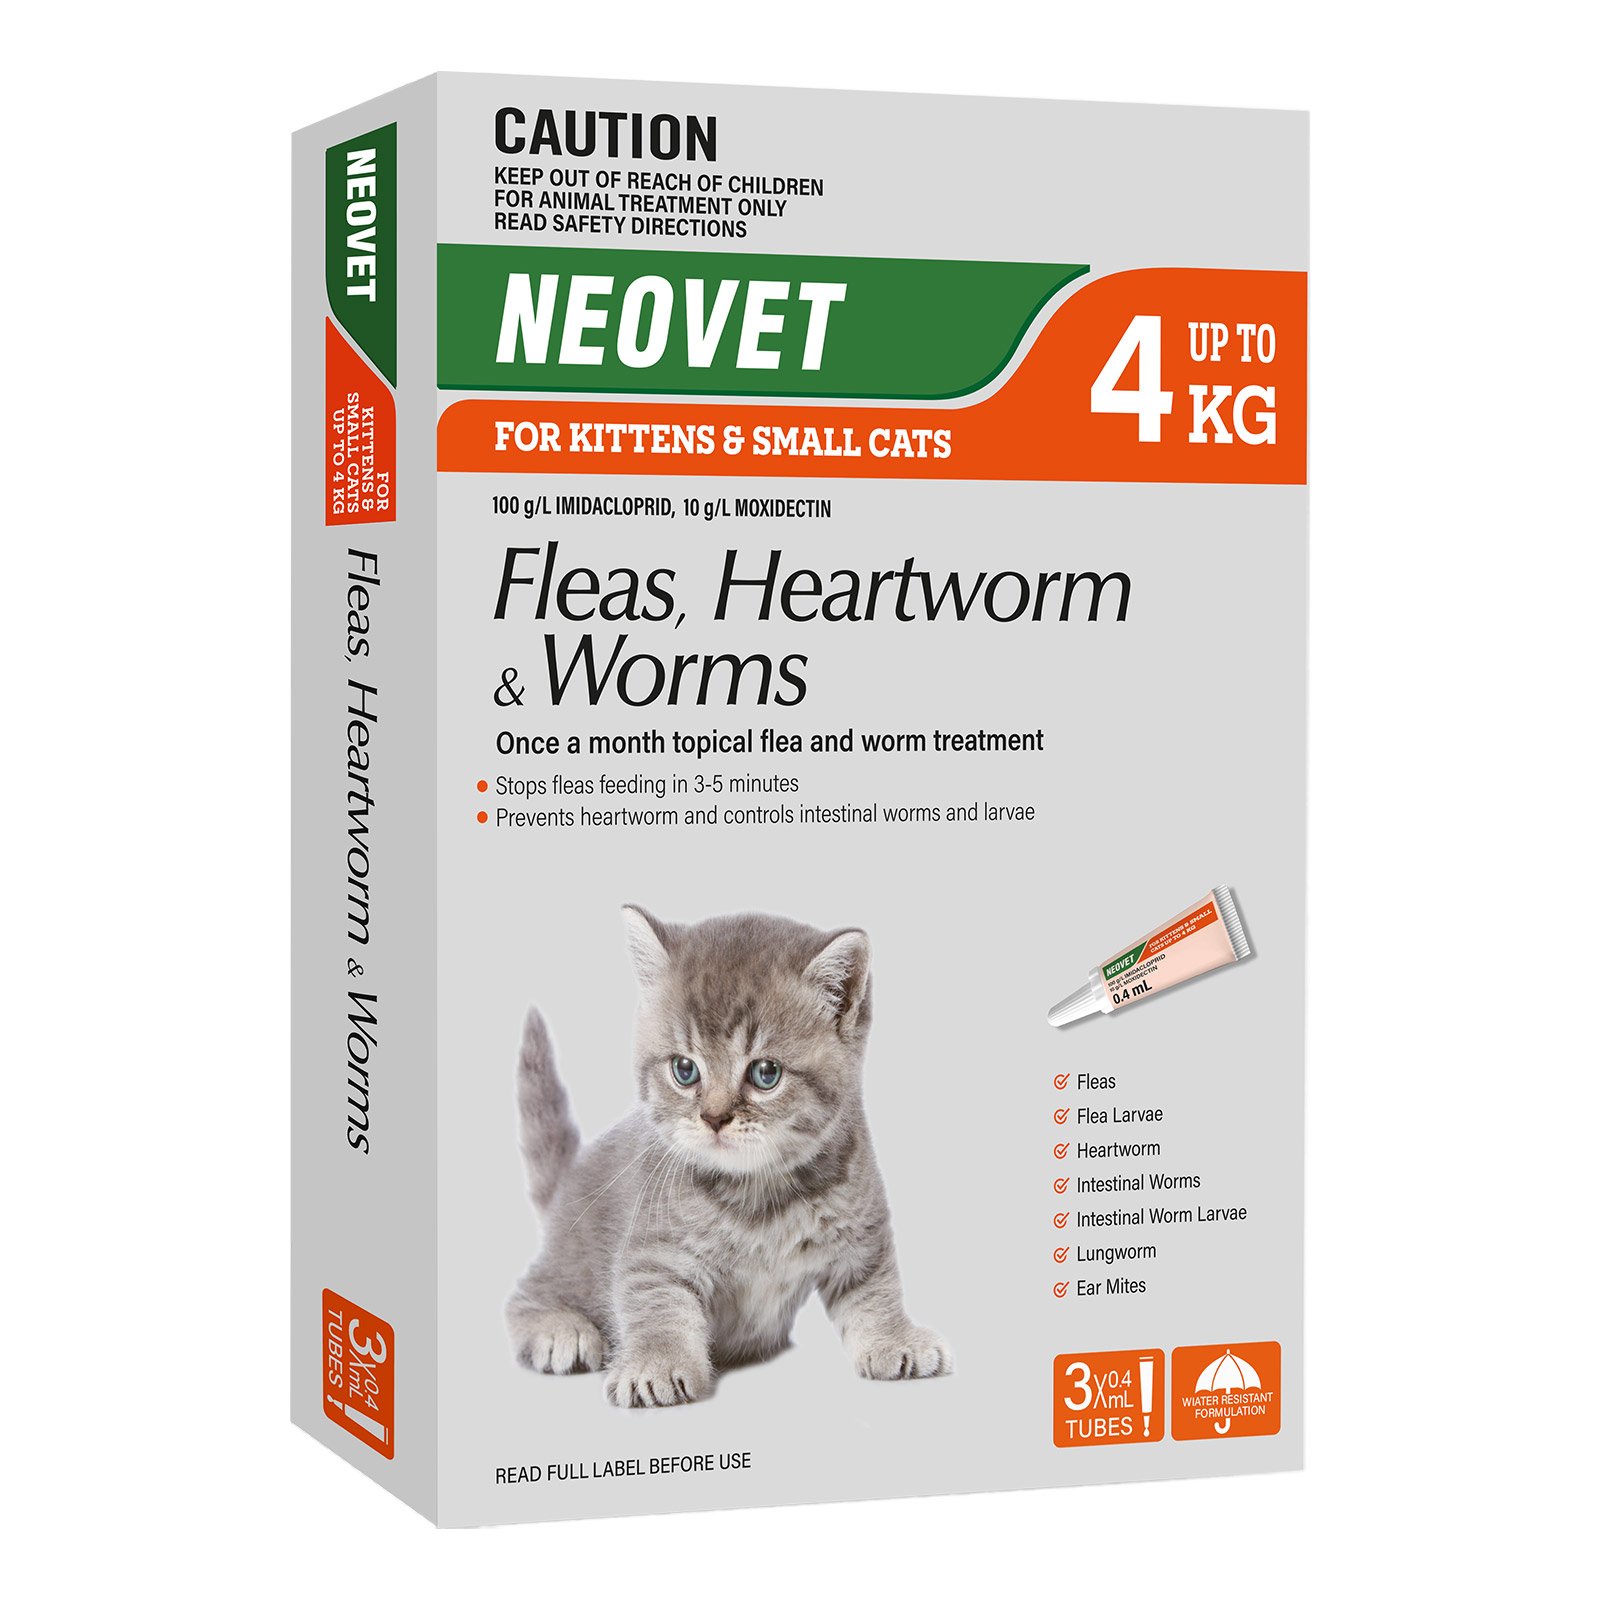 Neovet Flea and Worming